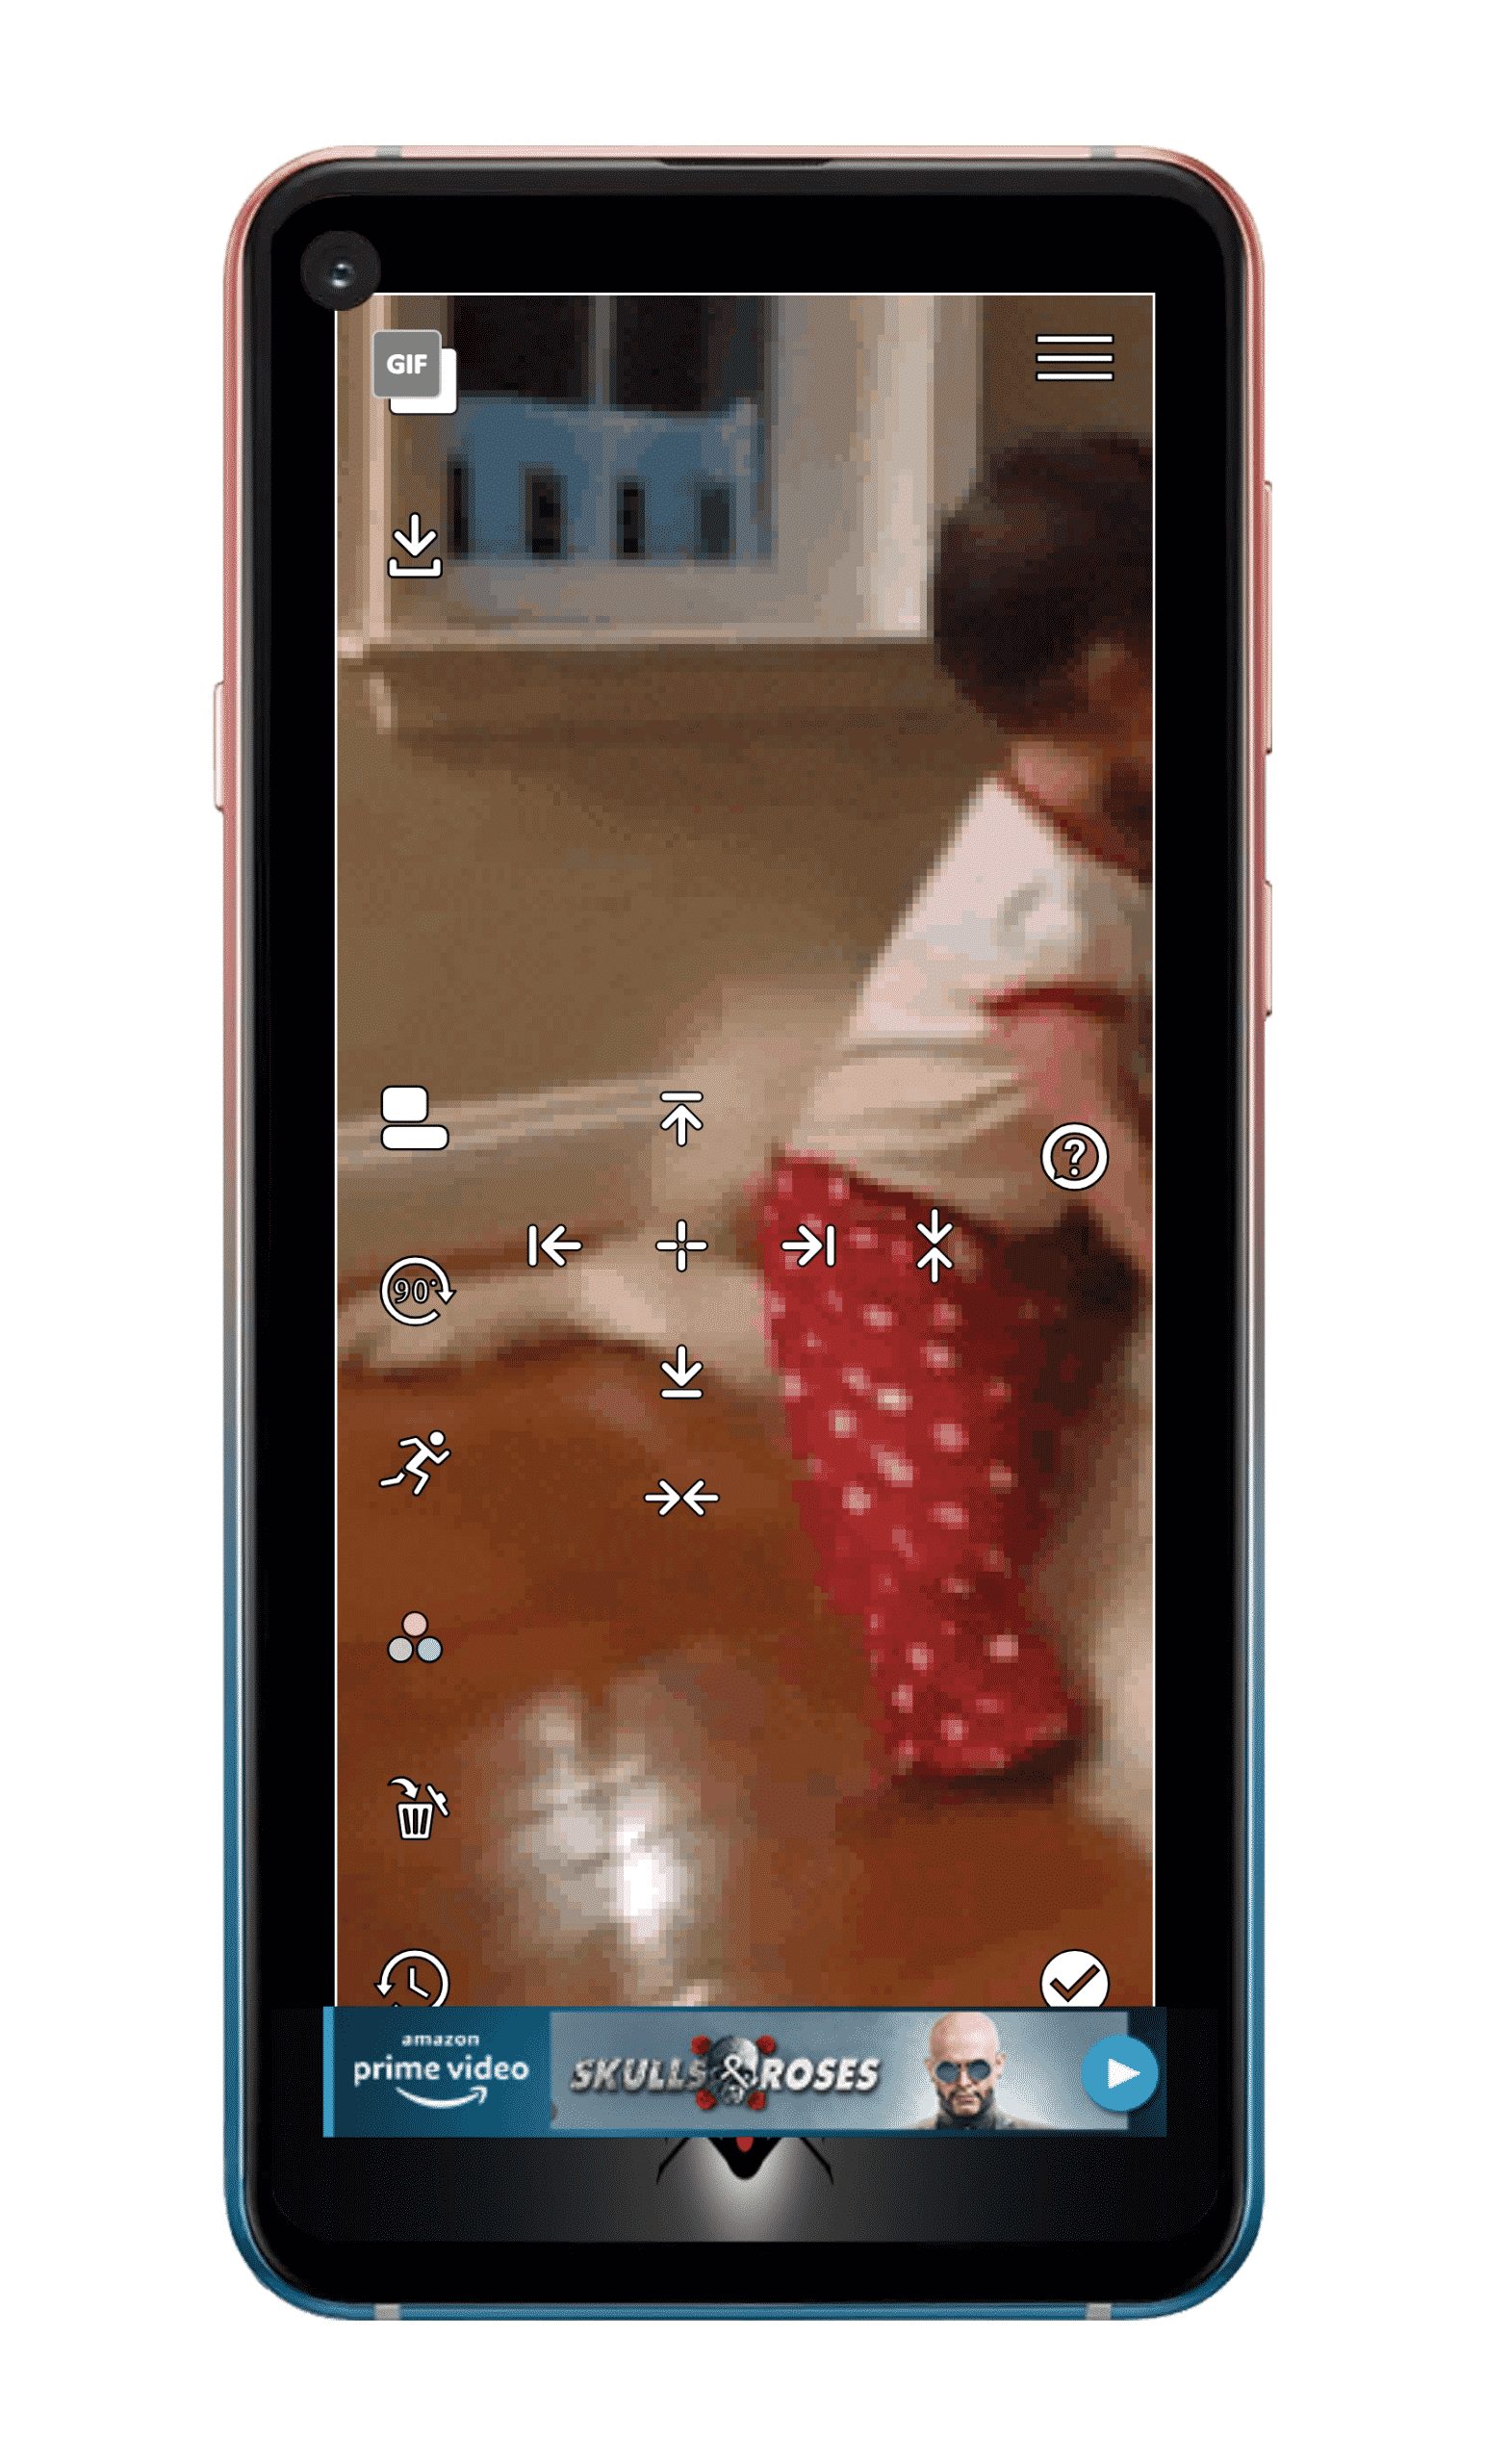 How To Use a GIF as Live Wallpaper On Android